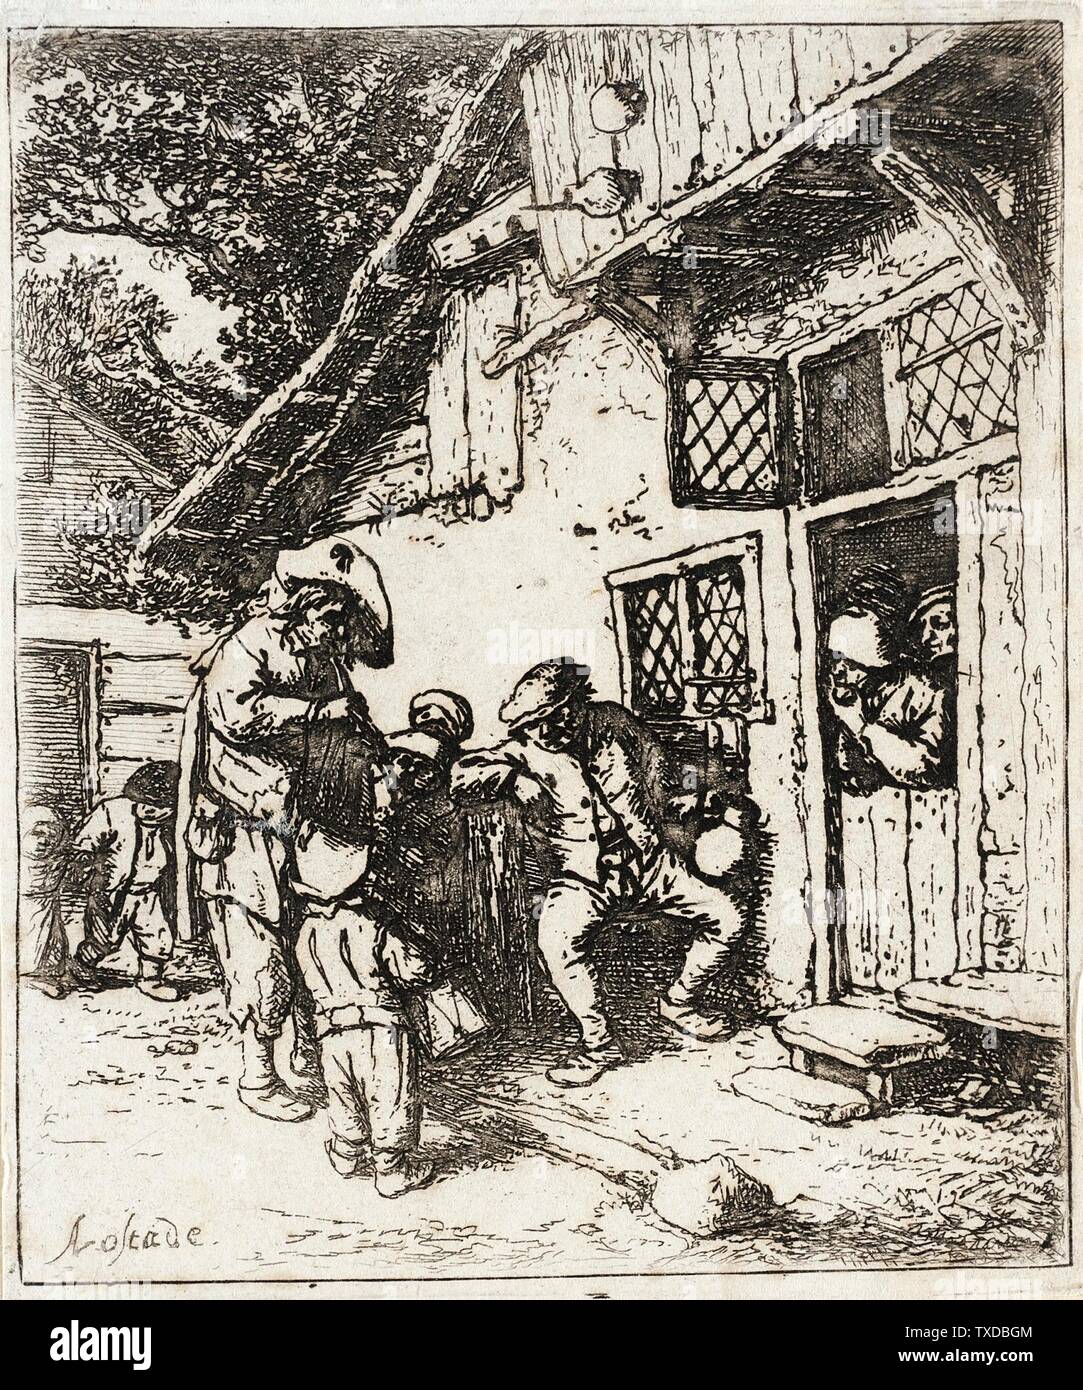 The Wandering Musicians;  Holland, 1642 (?) Alternate Le Jouer de flute et sa petit tambour Prints; etchings Etching Gift of Mrs. Mary B. Regan (31.21.106) Prints and Drawings; 1642 (?); Stock Photo